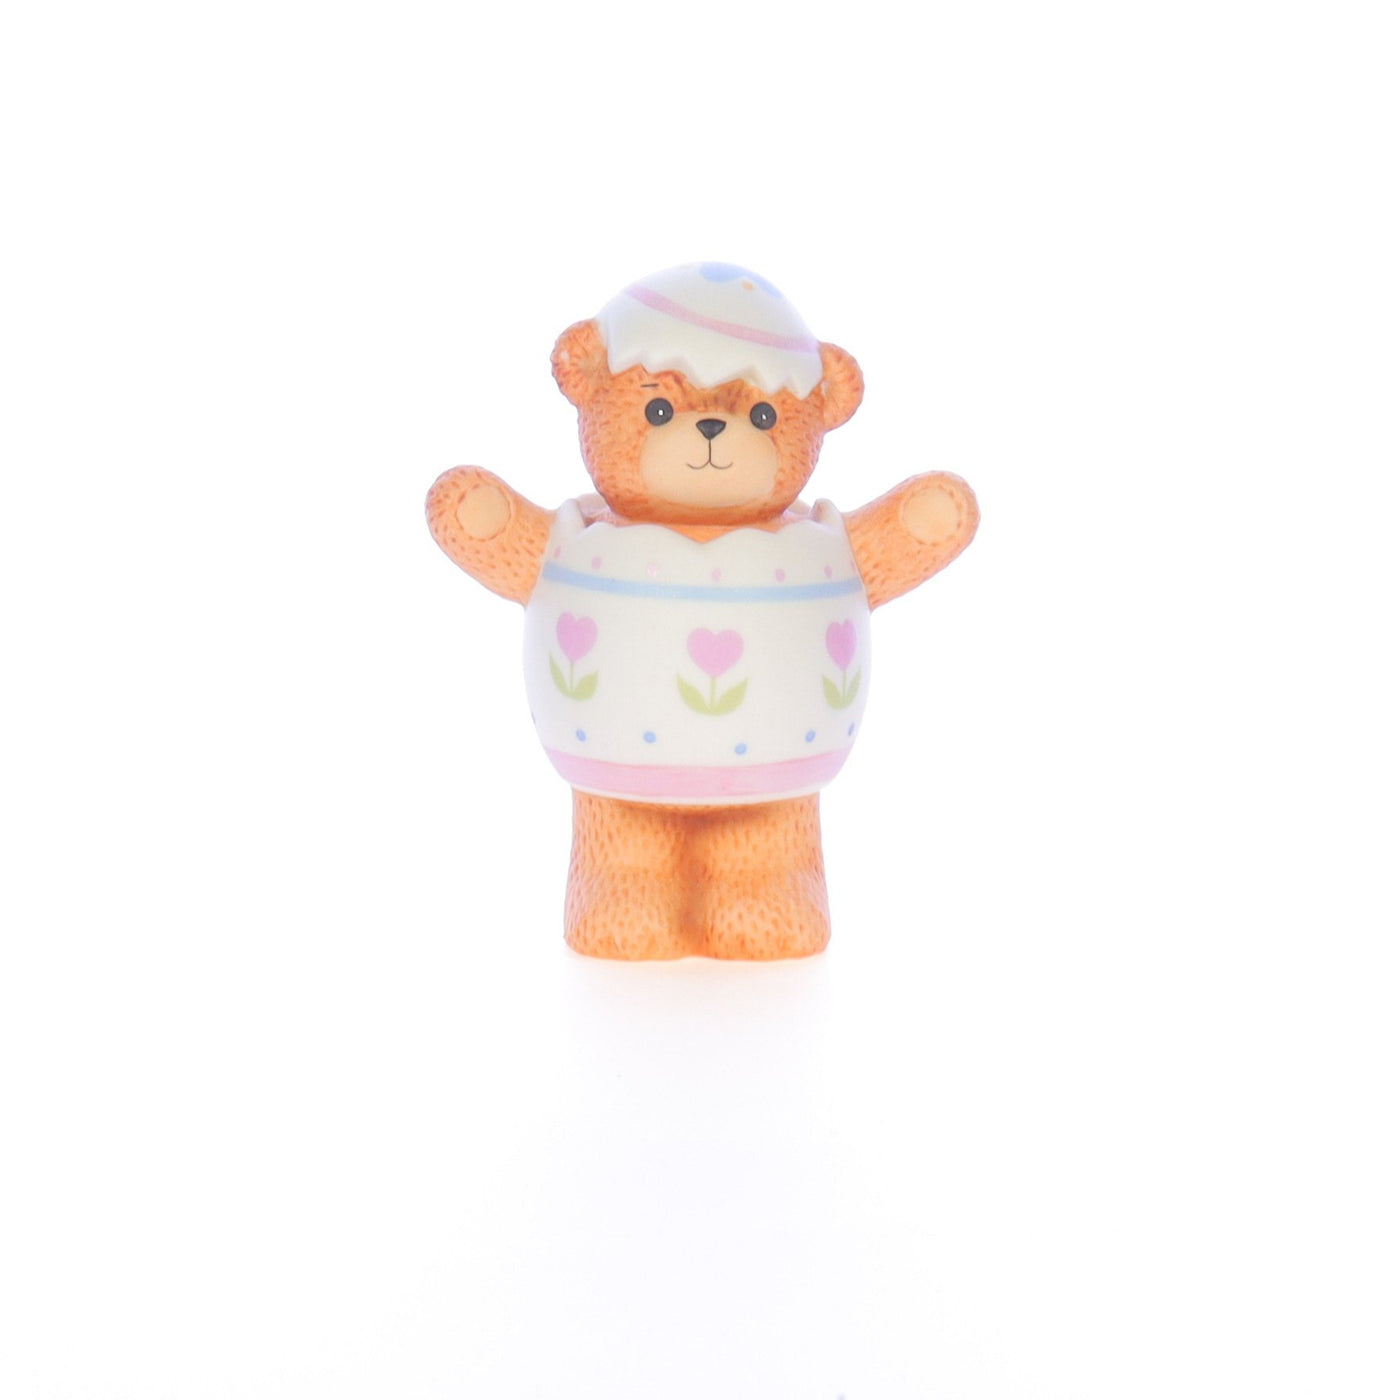 Lucy_And_Me_by_Lucy_Atwell_Porcelain_Figurine_Bear_in_Easter_Egg_Costume_Lucy_Unknown_056_01